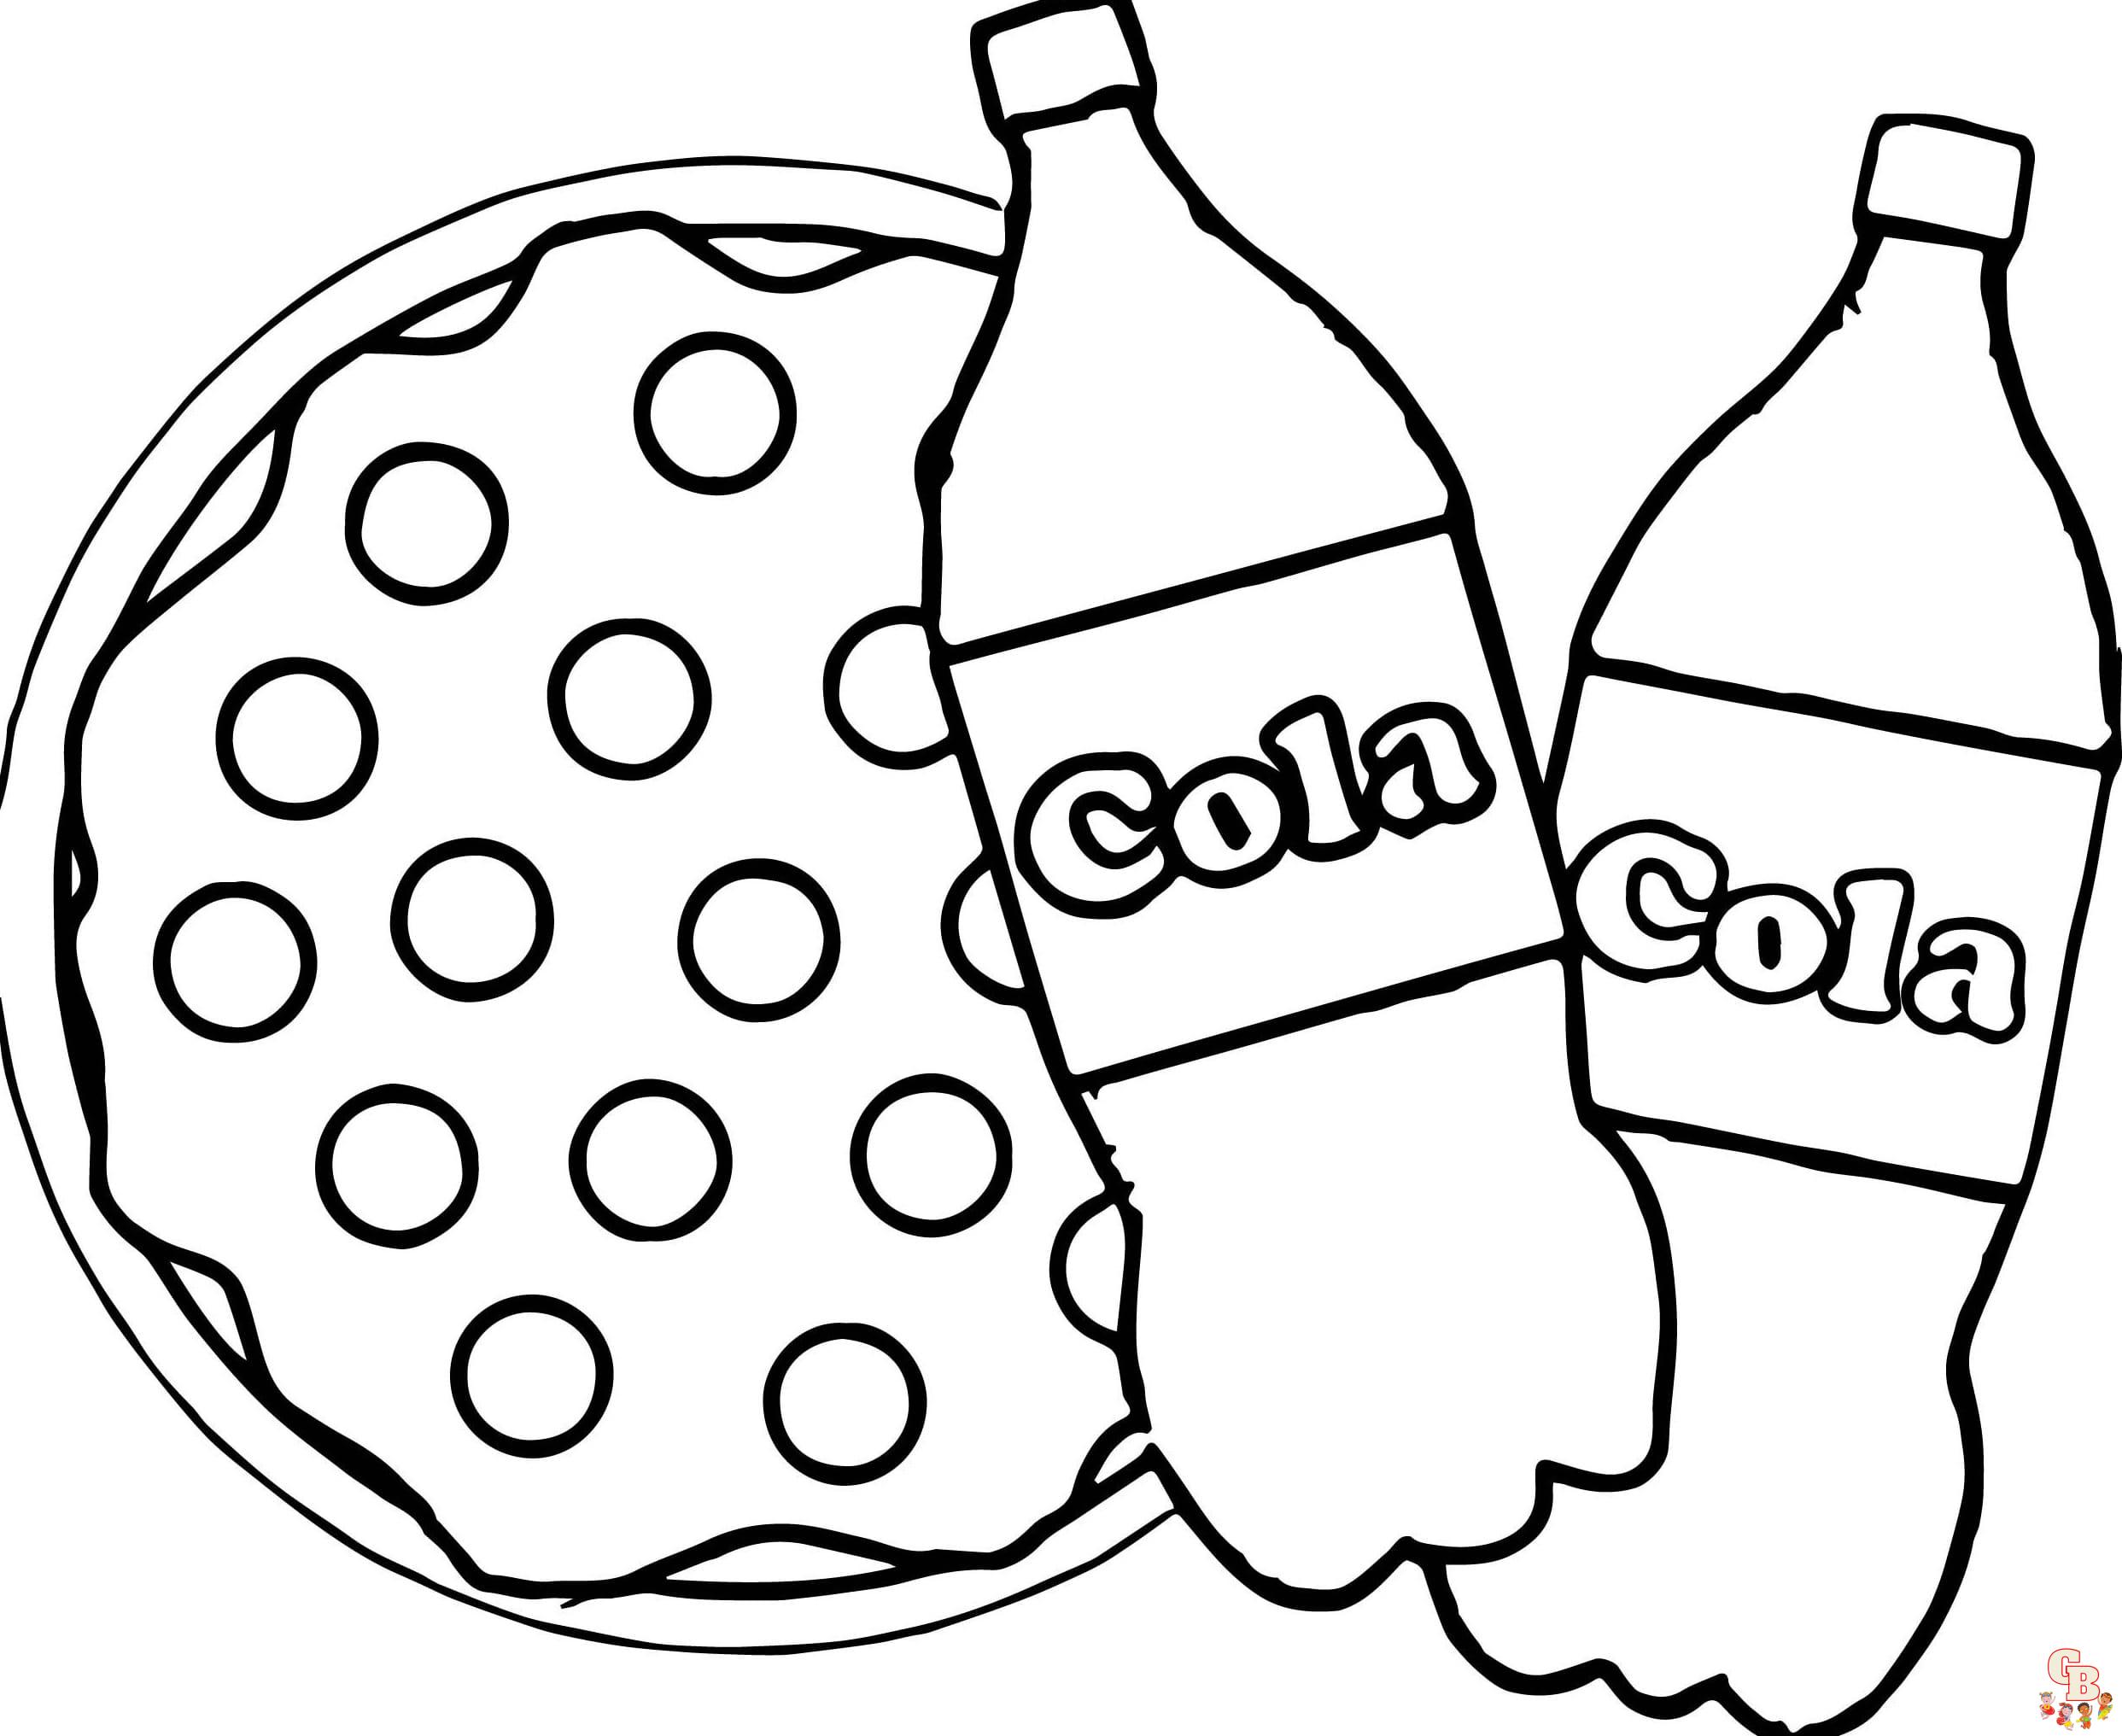 coca cola coloring pages to print